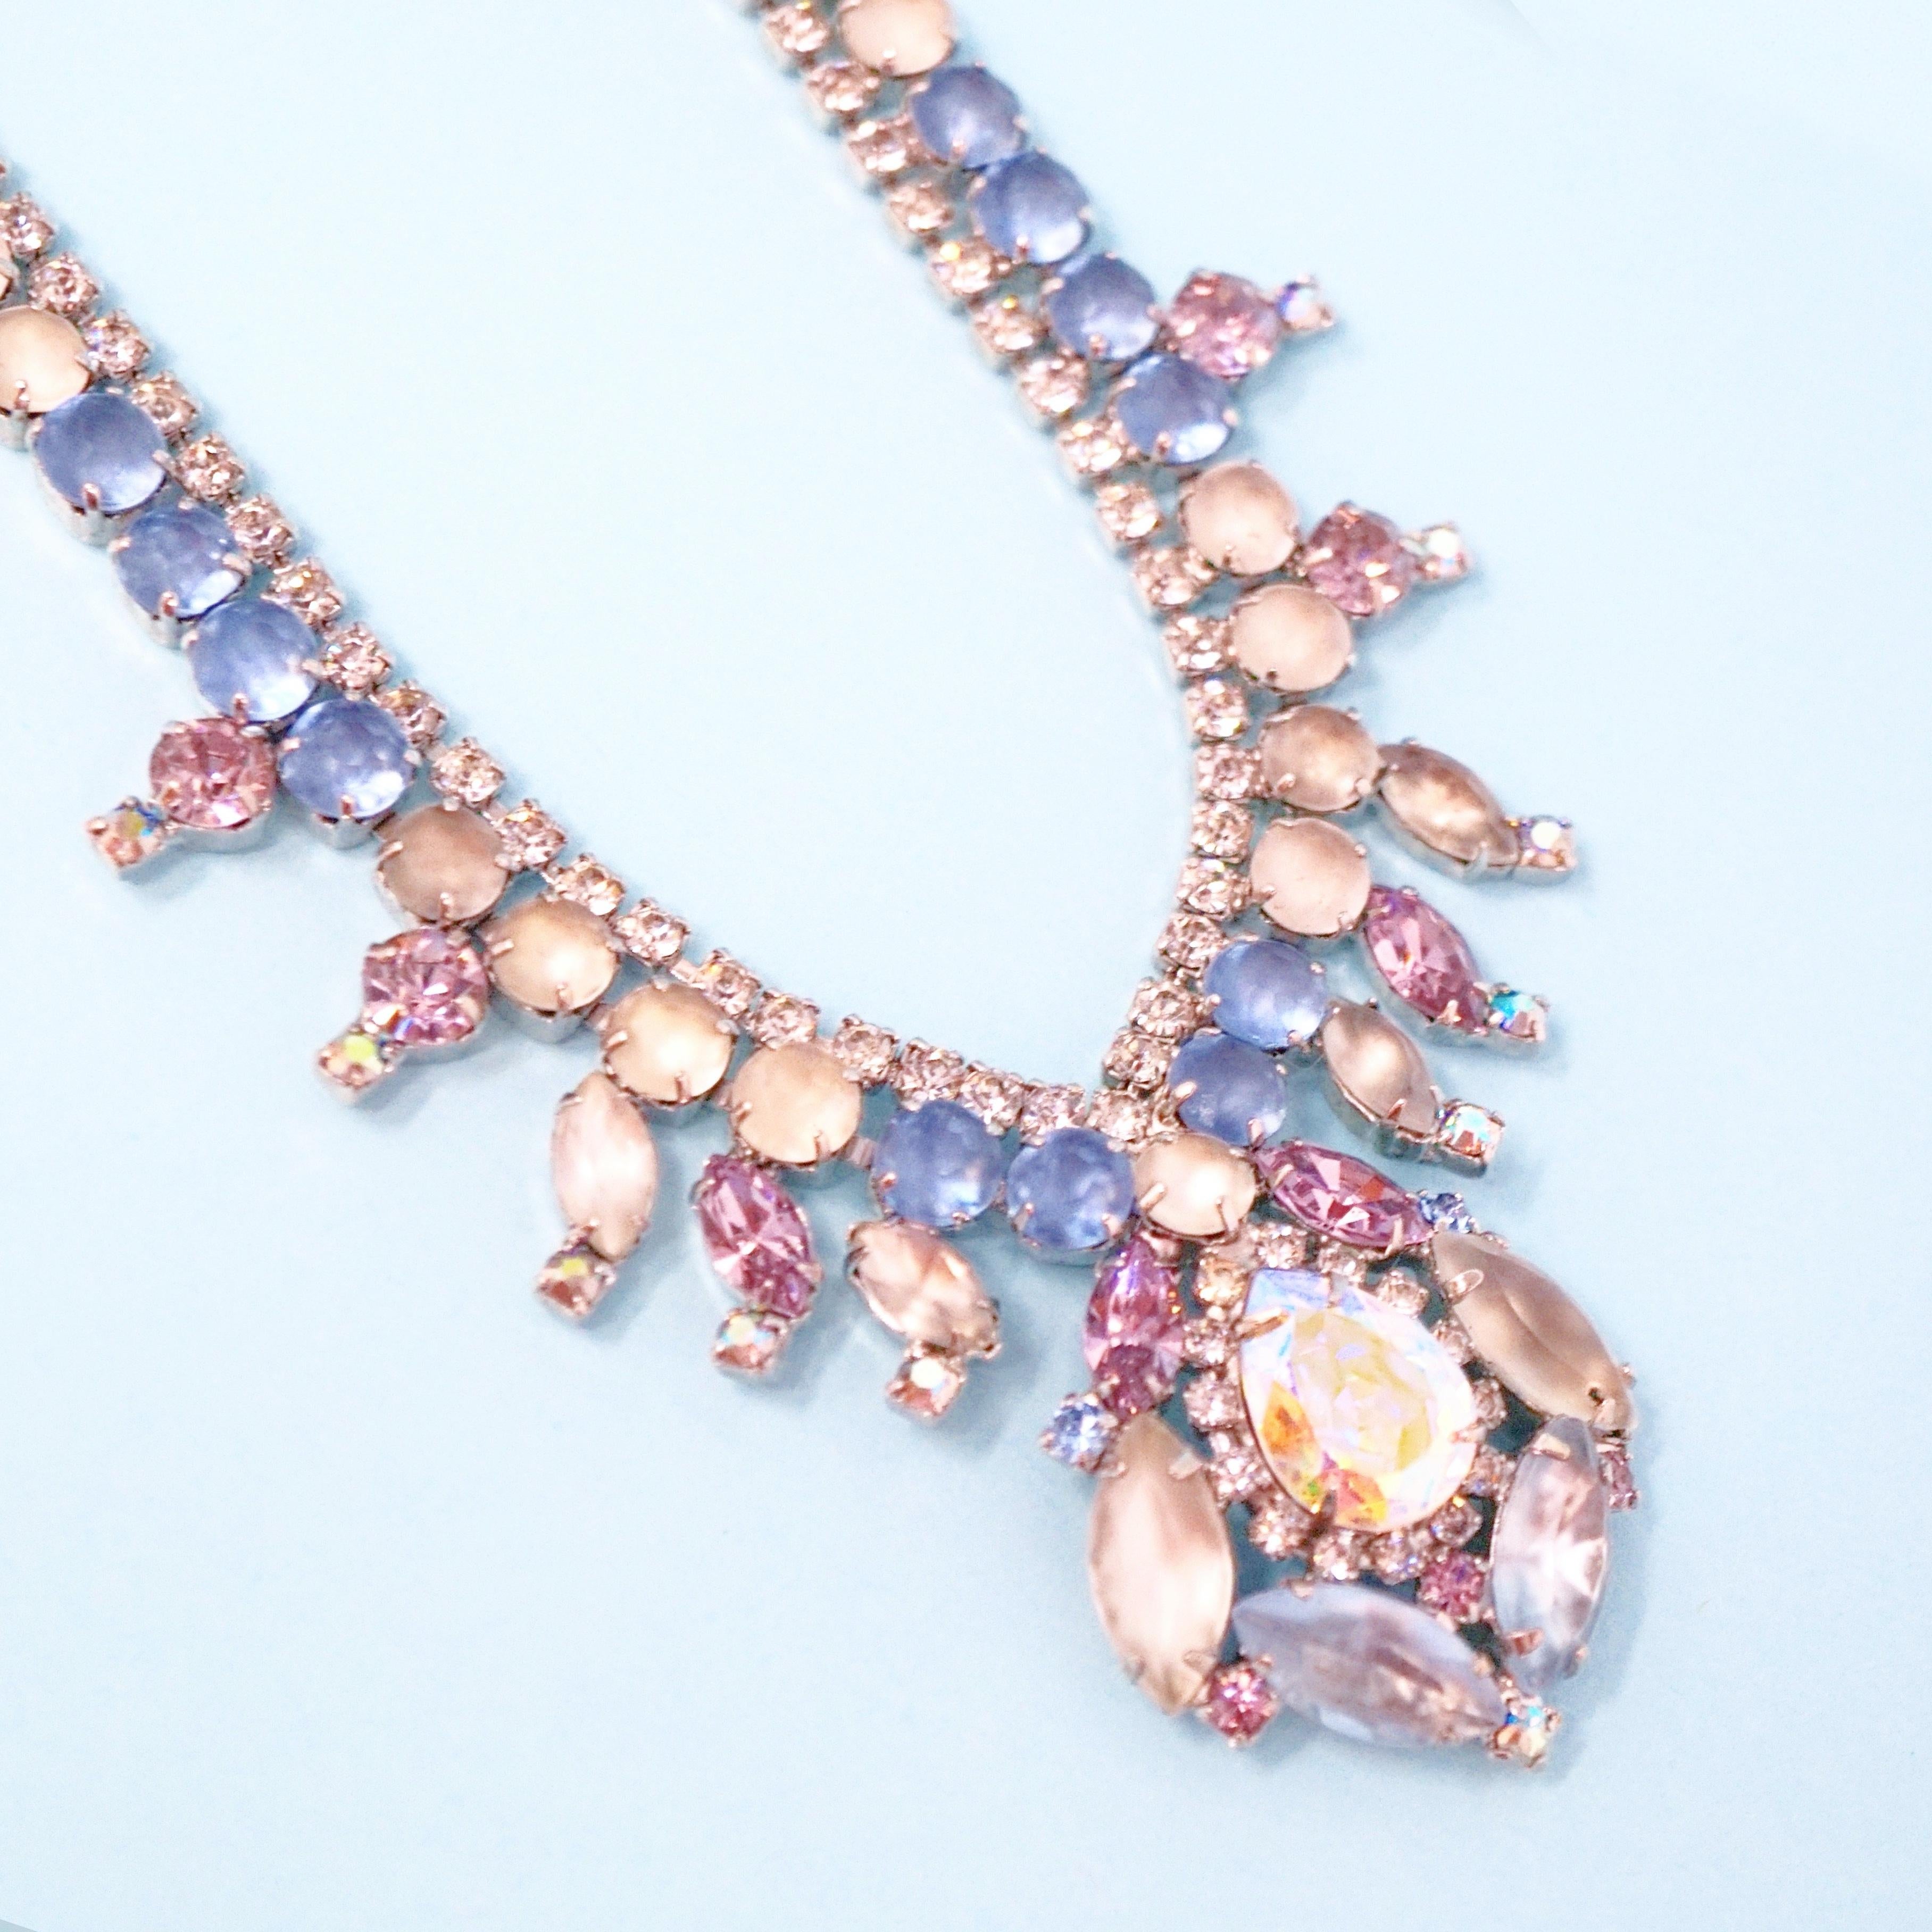 This breathtaking rhinestone necklace by the iconic jewelry brand Hobé is crafted with a pastel palette of rhinestones in dusty rose and sky blue hues.  What makes this piece so unique is the juxtaposition of polished, shiny rhinestones with rare